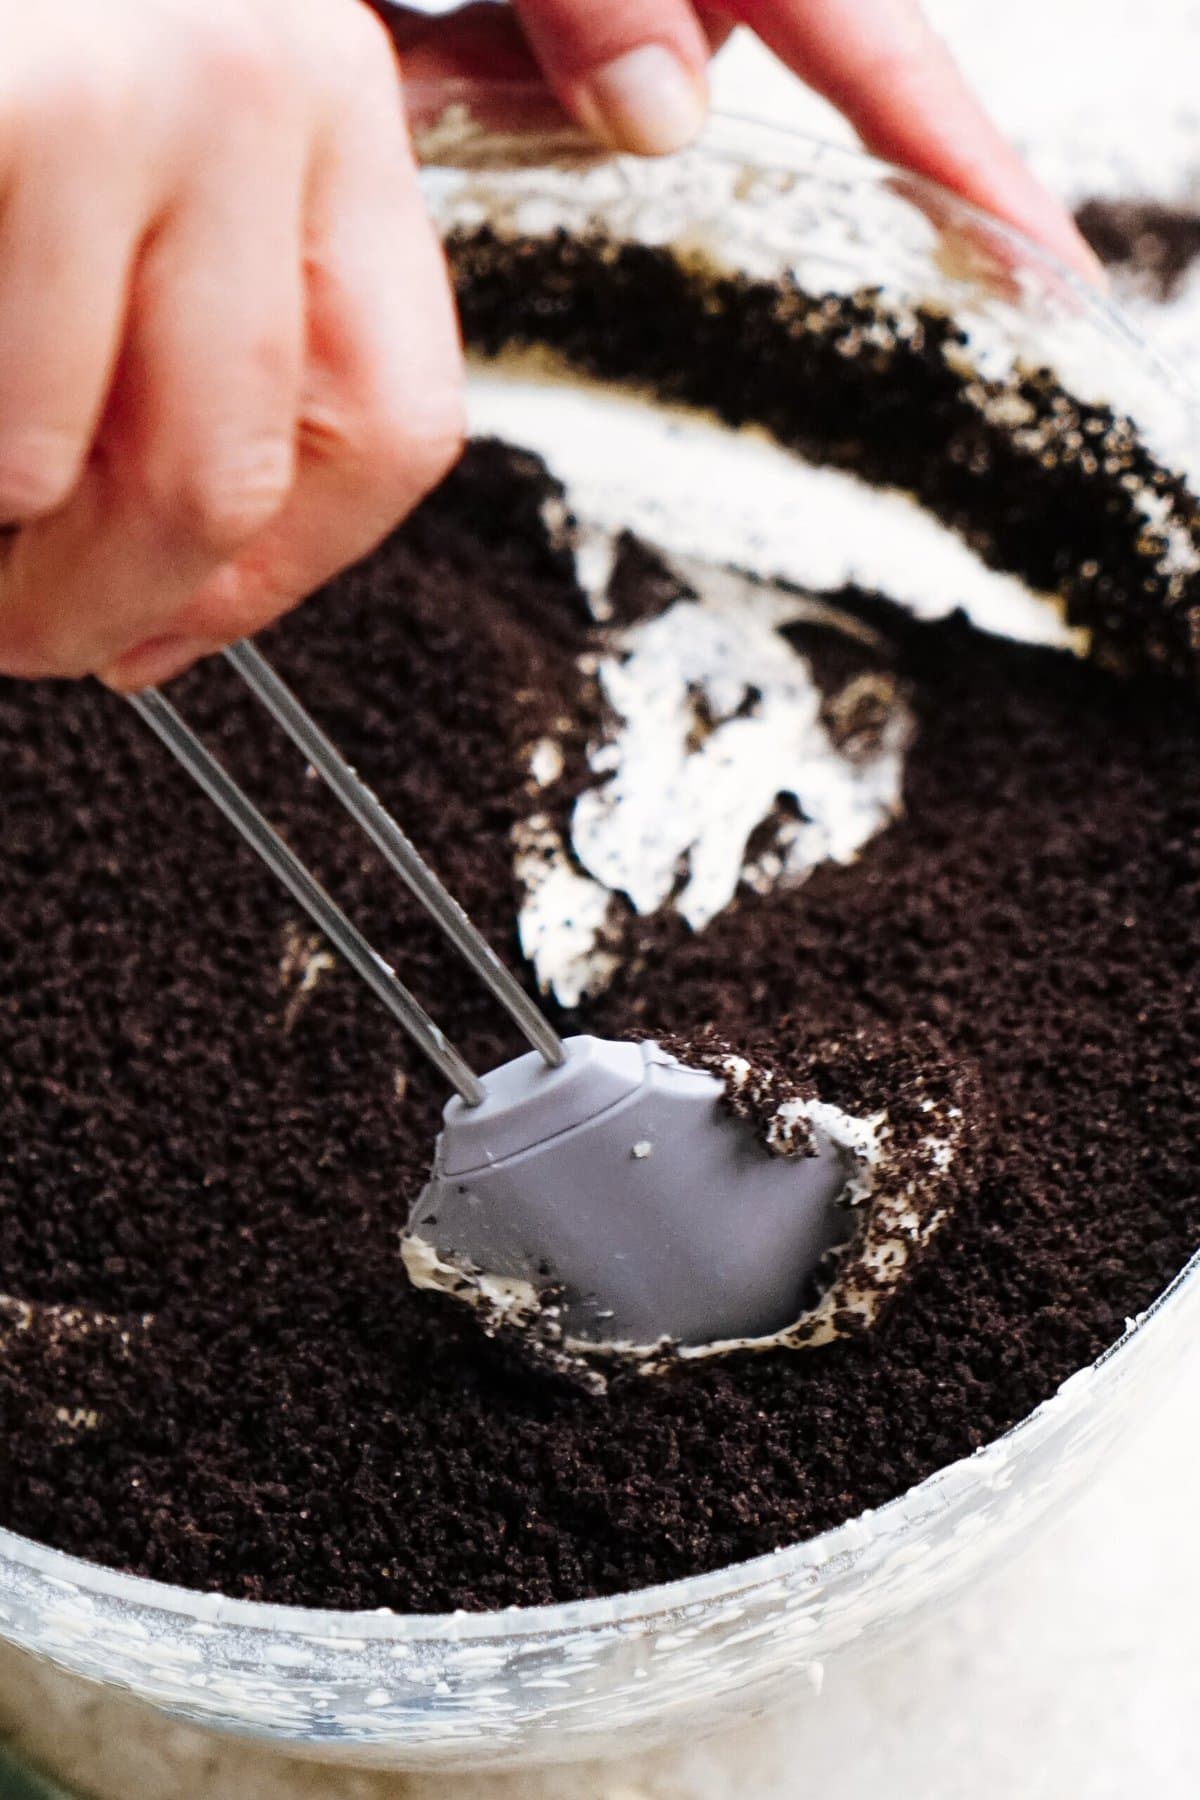 Close-up of a hand holding a spoon and scooping a mixture of crushed chocolate cookies and cream from a glass bowl.